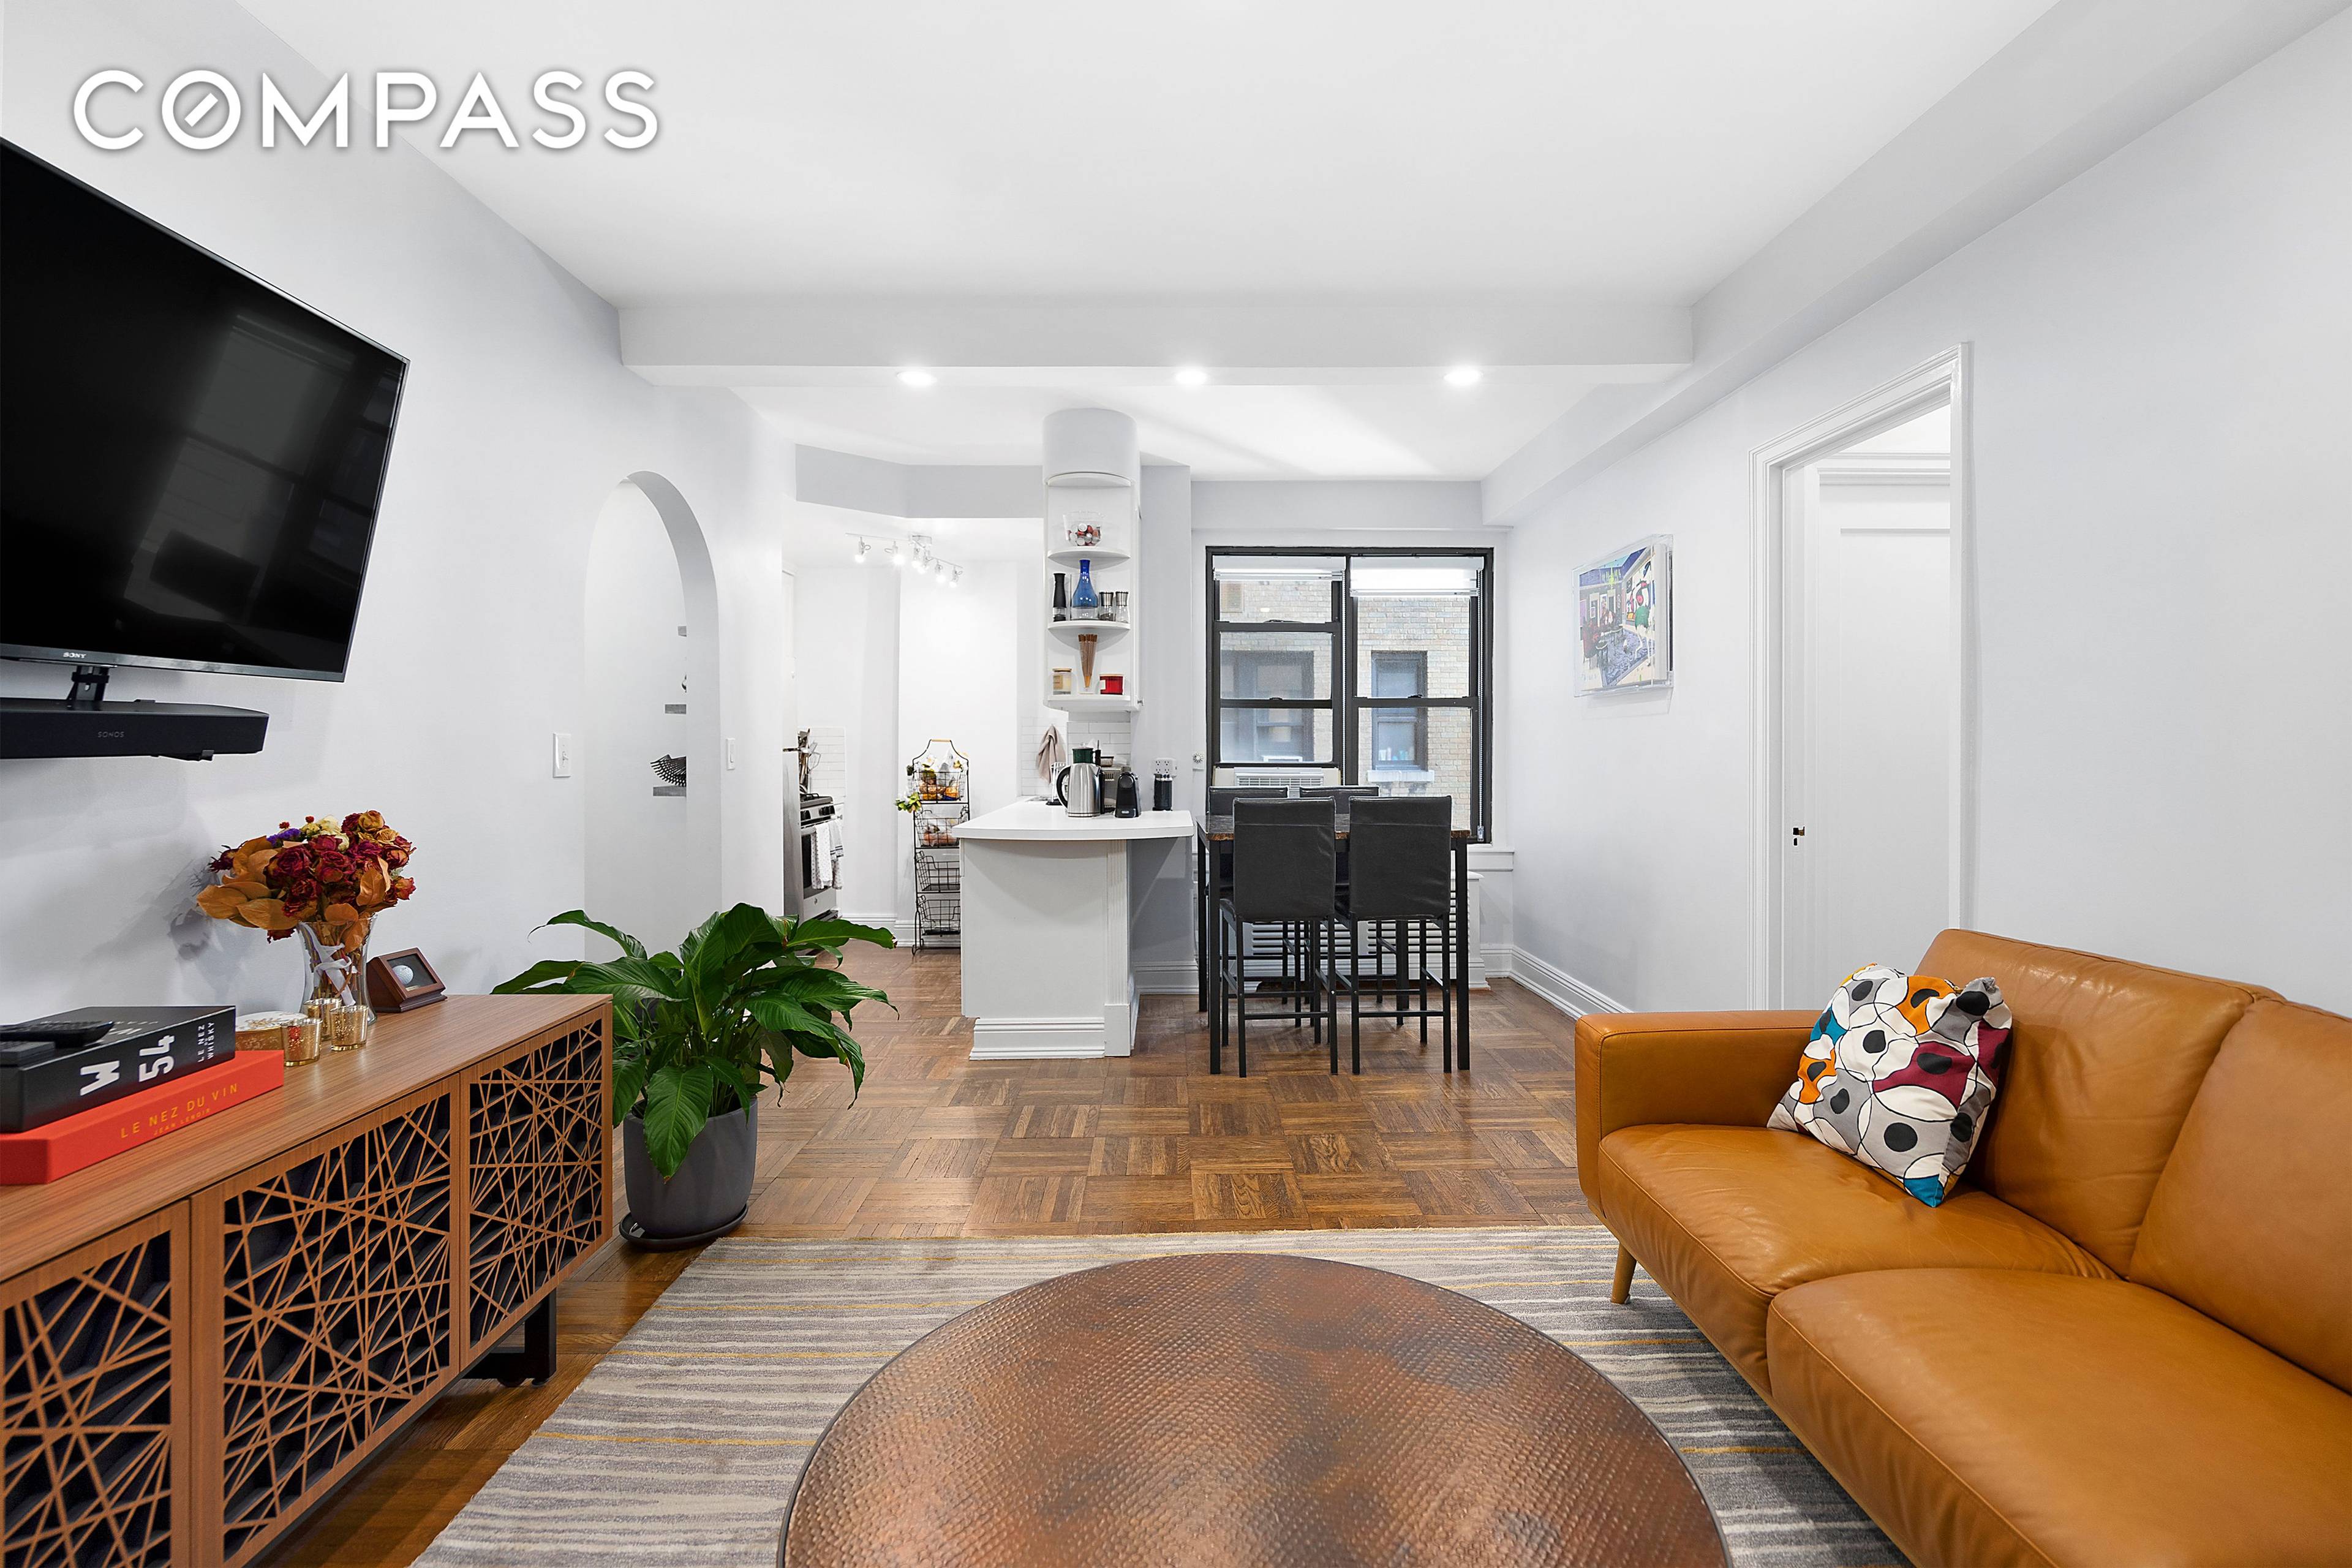 Welcome to 235 West End Ave, a stunning condo located in the heart of Manhattan, NY.